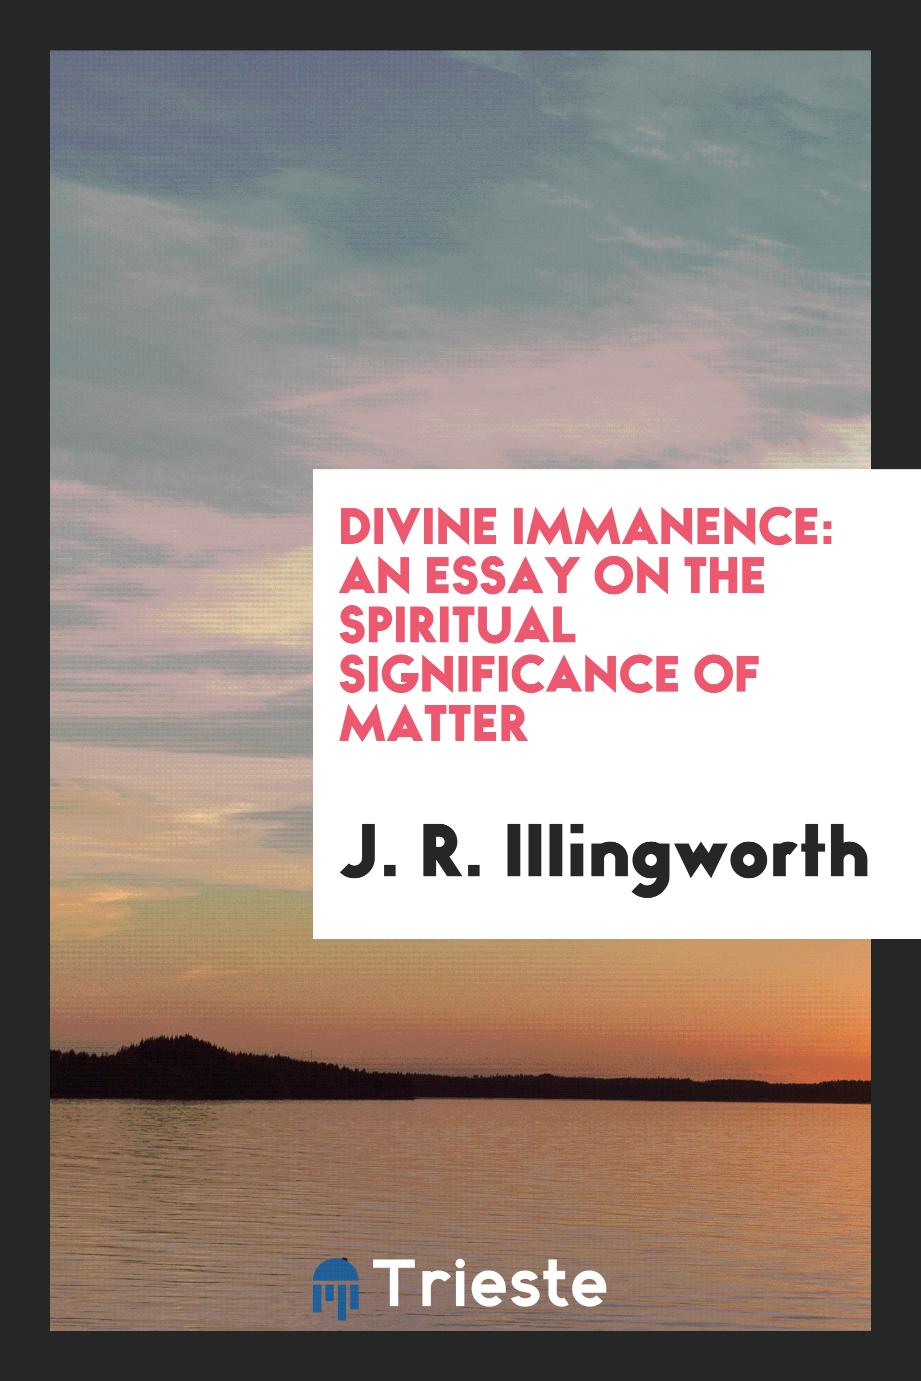 Divine Immanence: An Essay on the Spiritual Significance of Matter